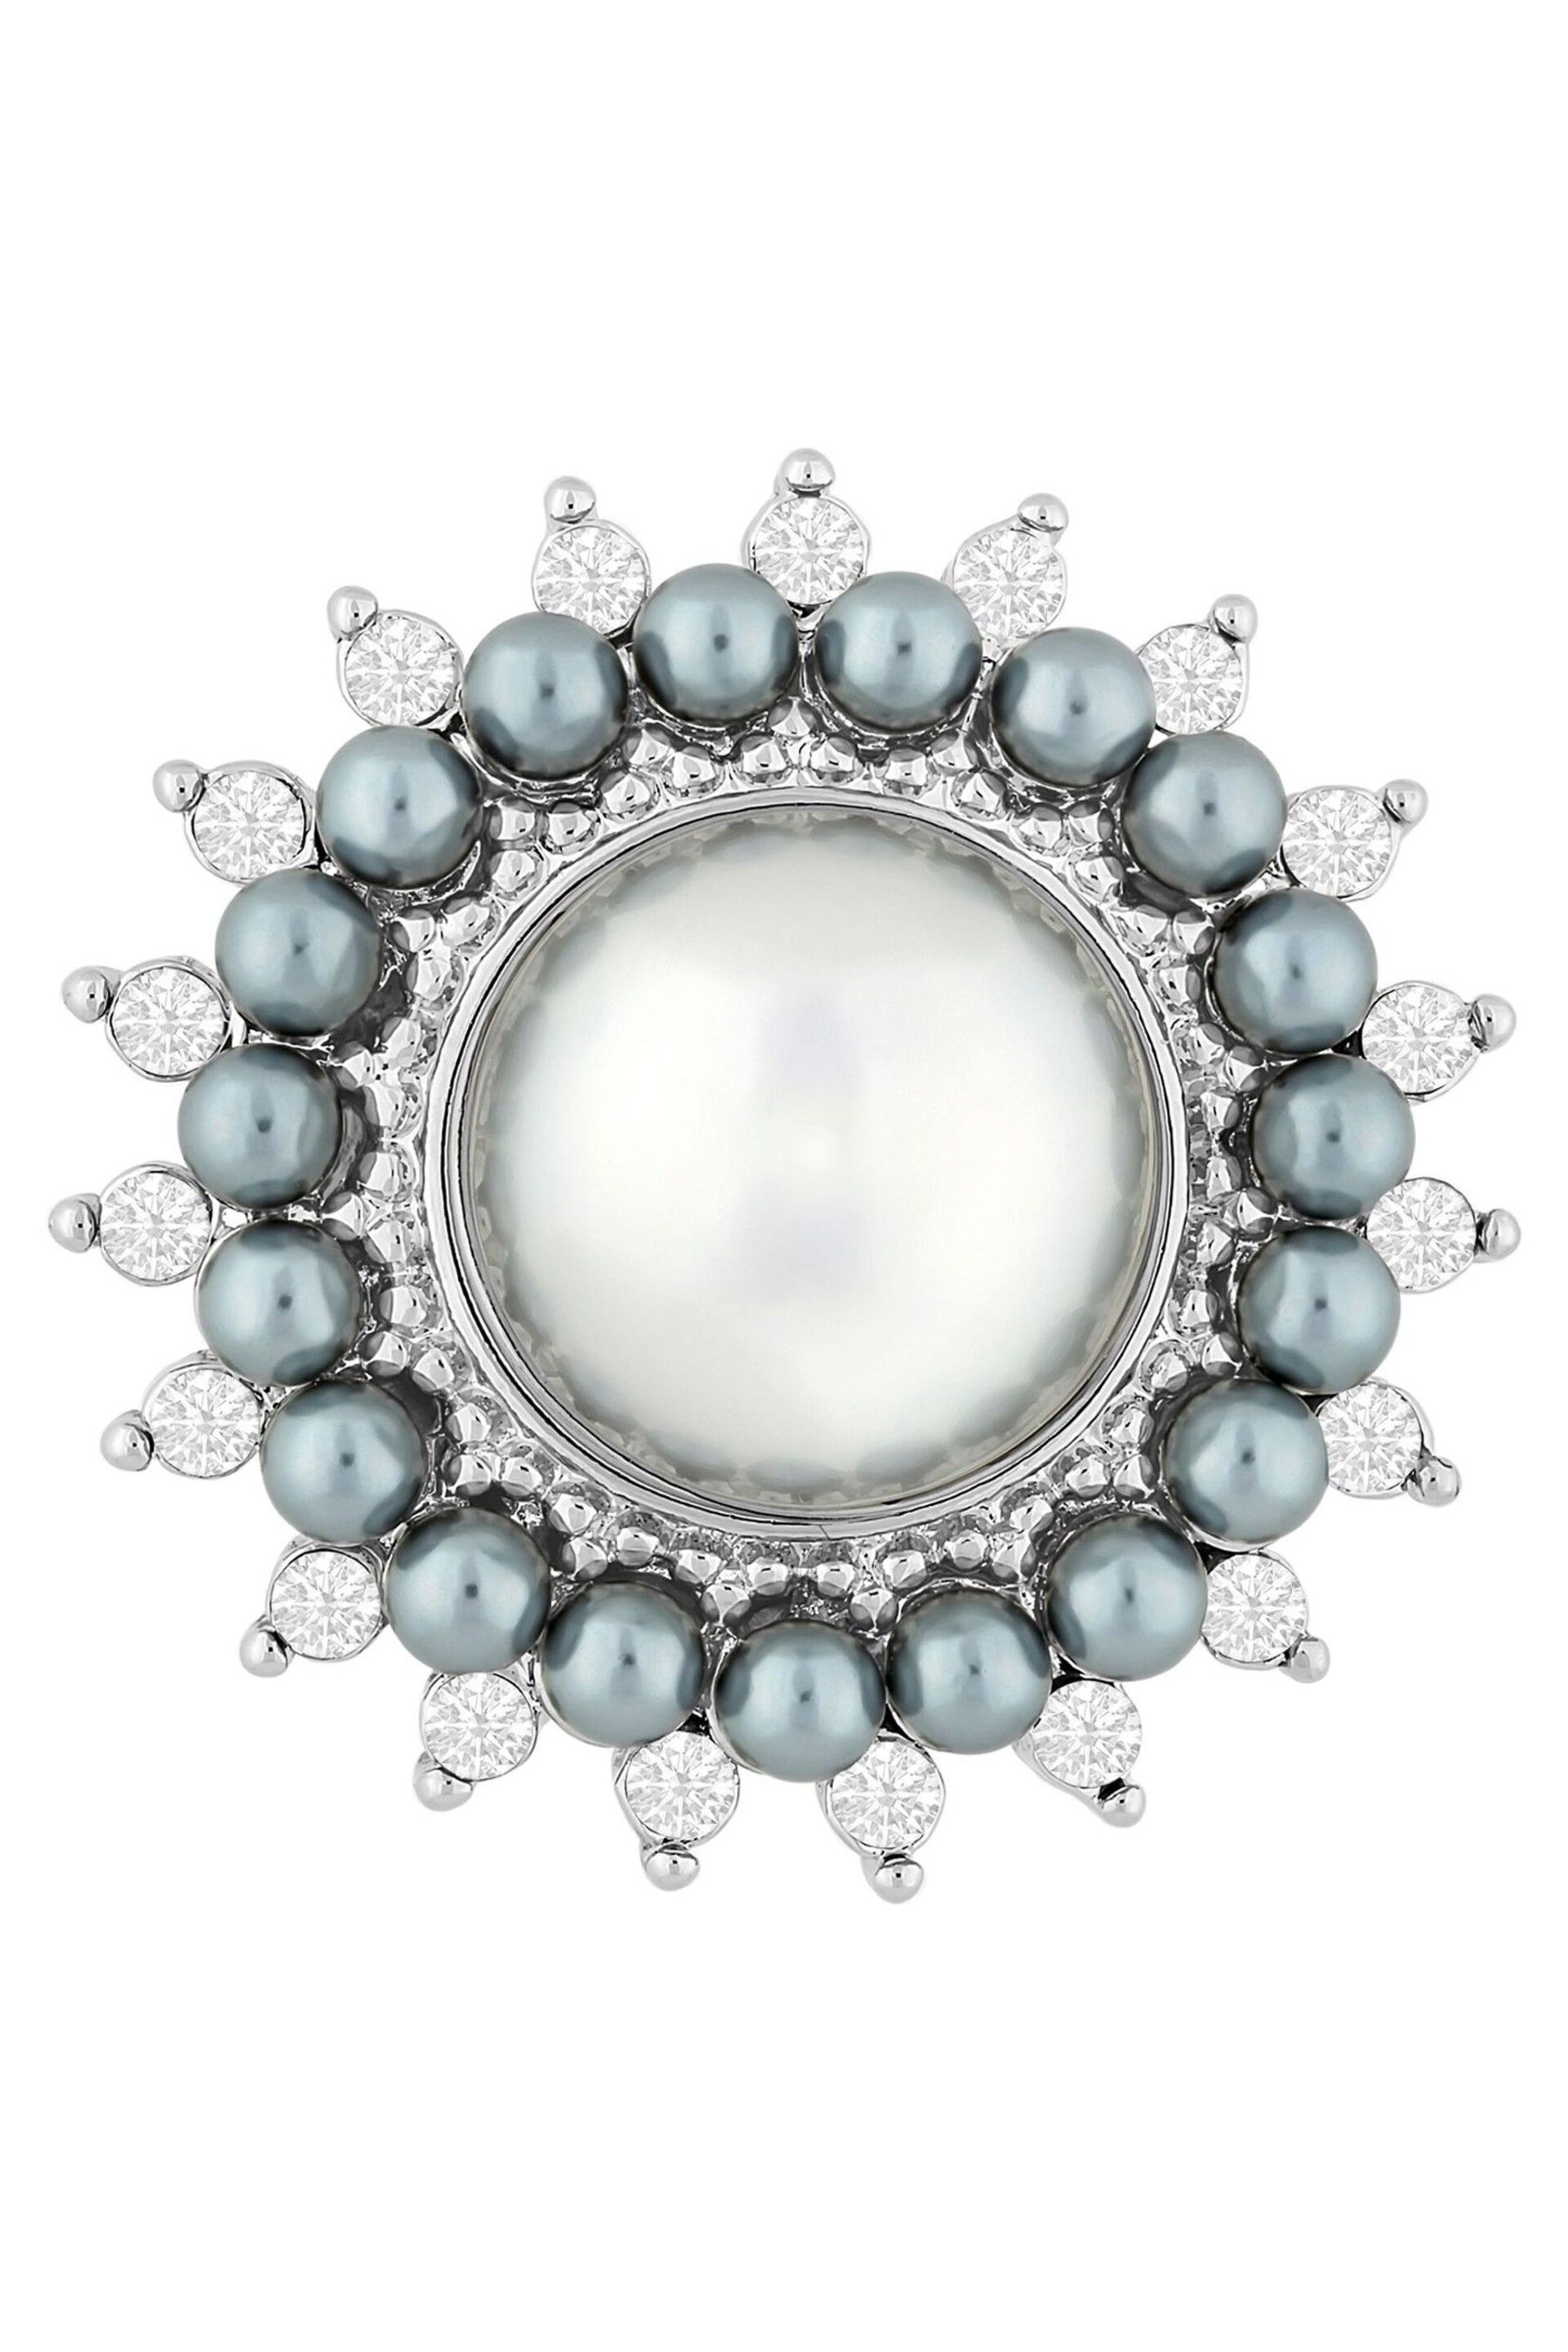 Jon Richard Silver Vintage Inspired Pearl Brooch - Gift Boxed - Image 2 of 2